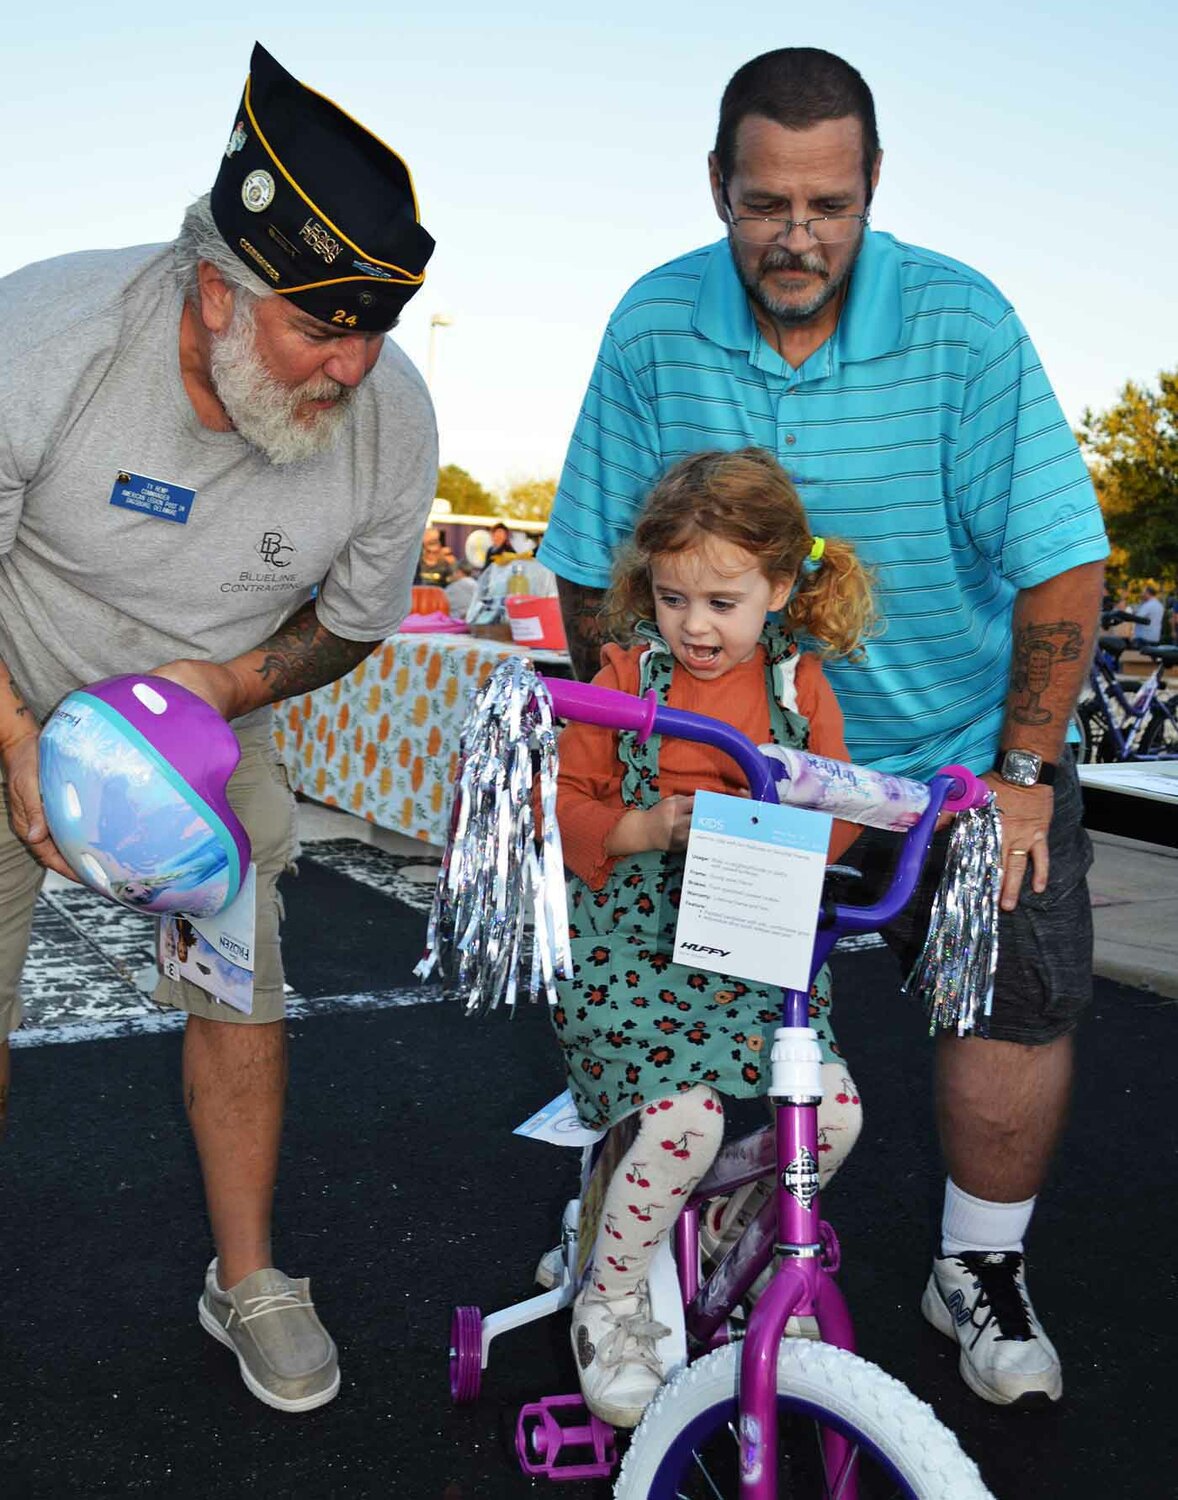 Dagsboro Mayor Brian Baull looks on as American Legion Post 24's Ty Remp presents a helmet to 4-year-old Callie Edwards as she sits on the bicycle she won during the 2022 Dagsboro Night Out.